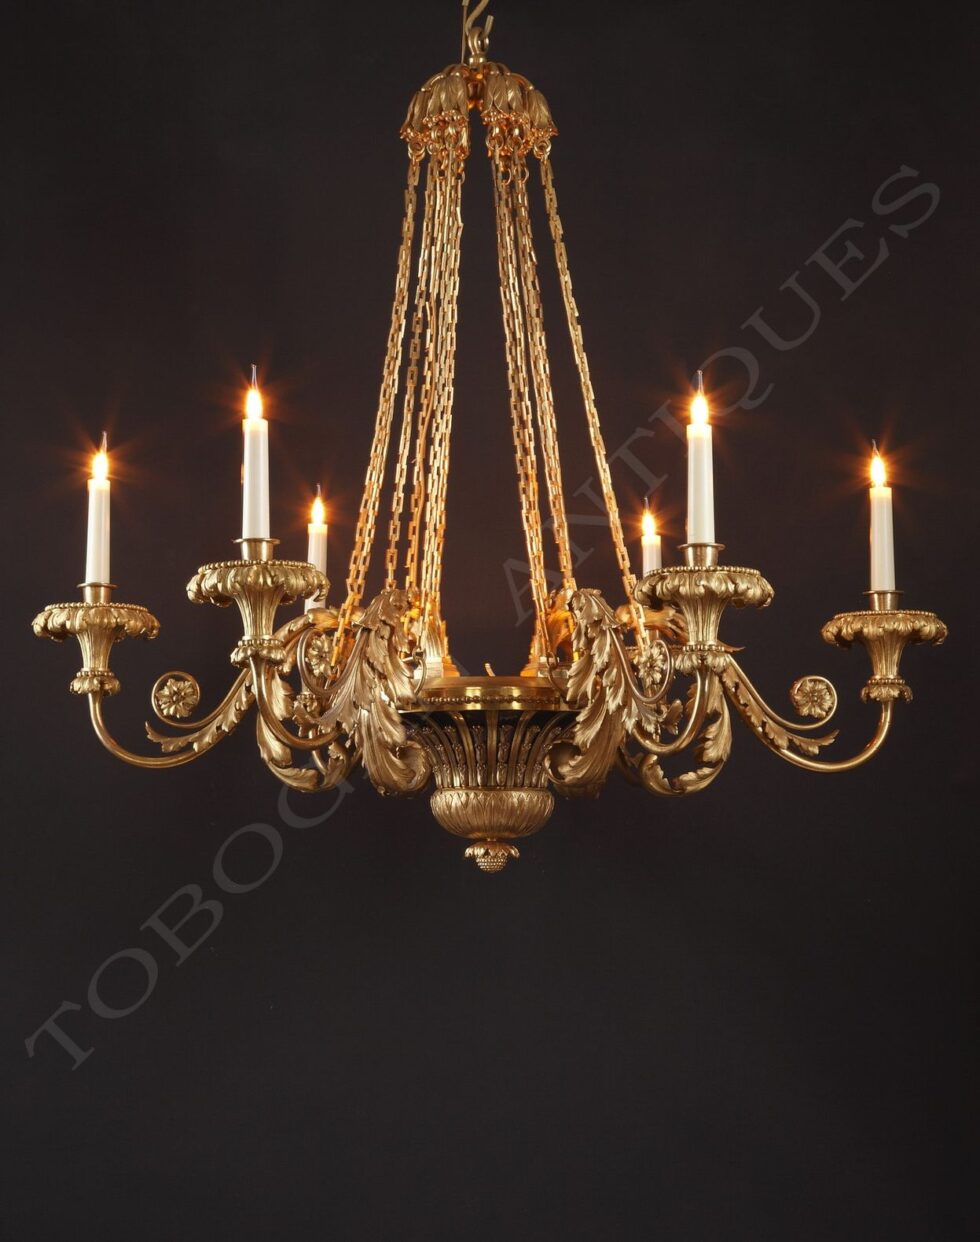 H. Dasson <br/> Chandelier with Acanthus